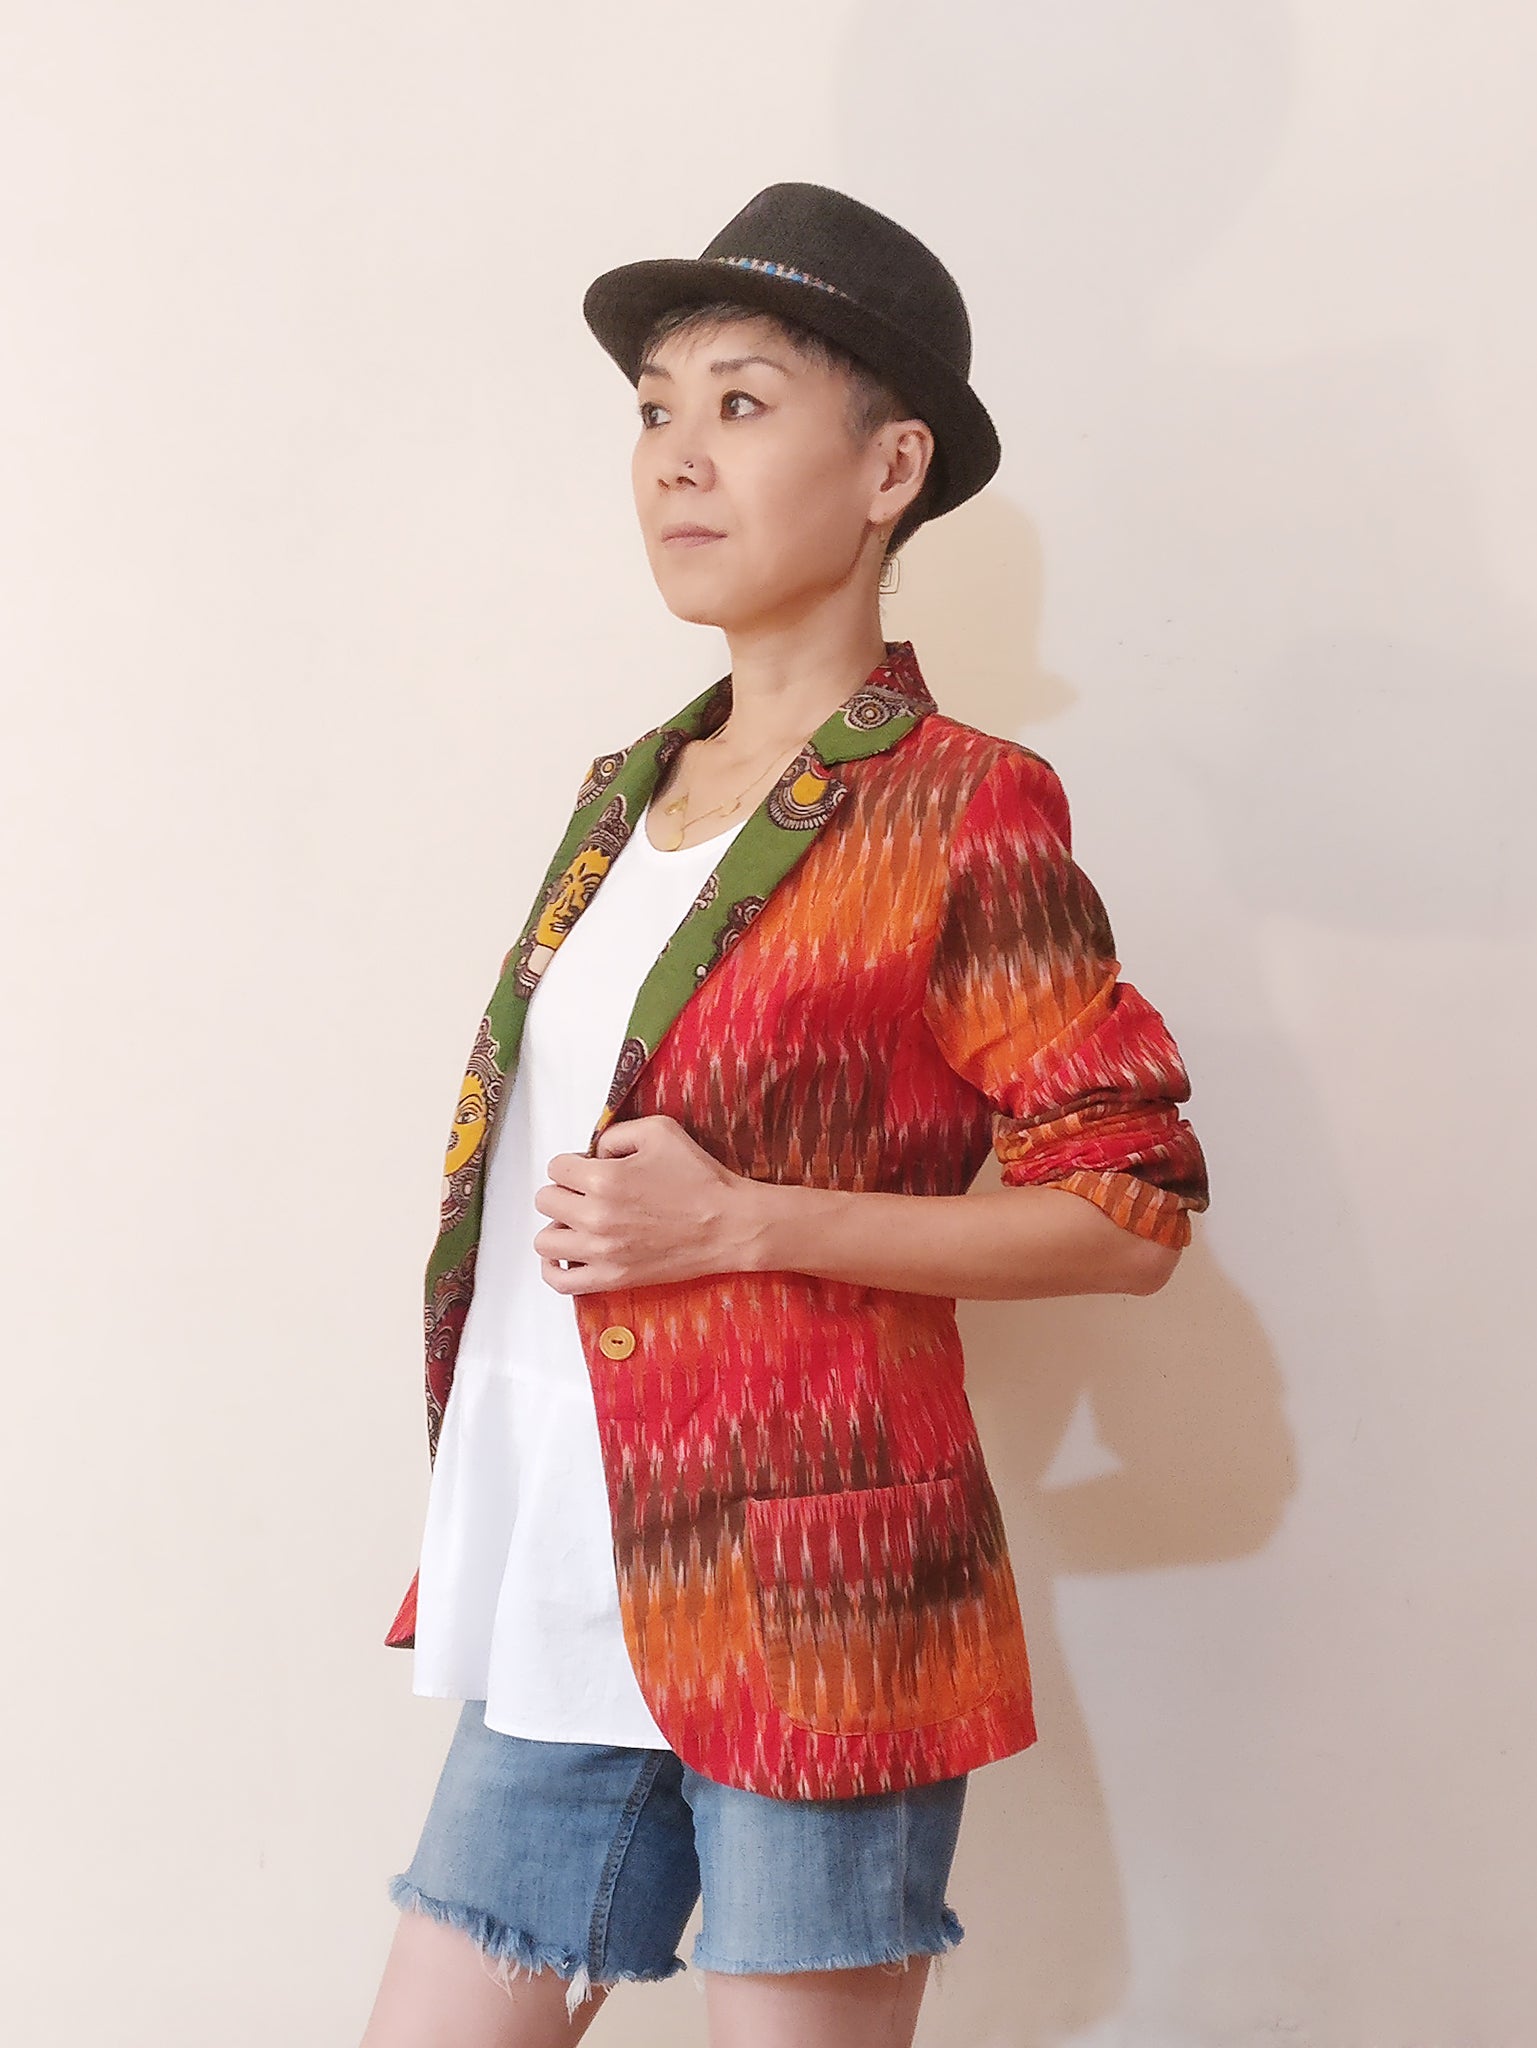 Cotton Ikat blazer with a fun god print collar. Made from female body patterns, but anyone with any sex or gender please enjoy this jacket. Buy online. Profile photo